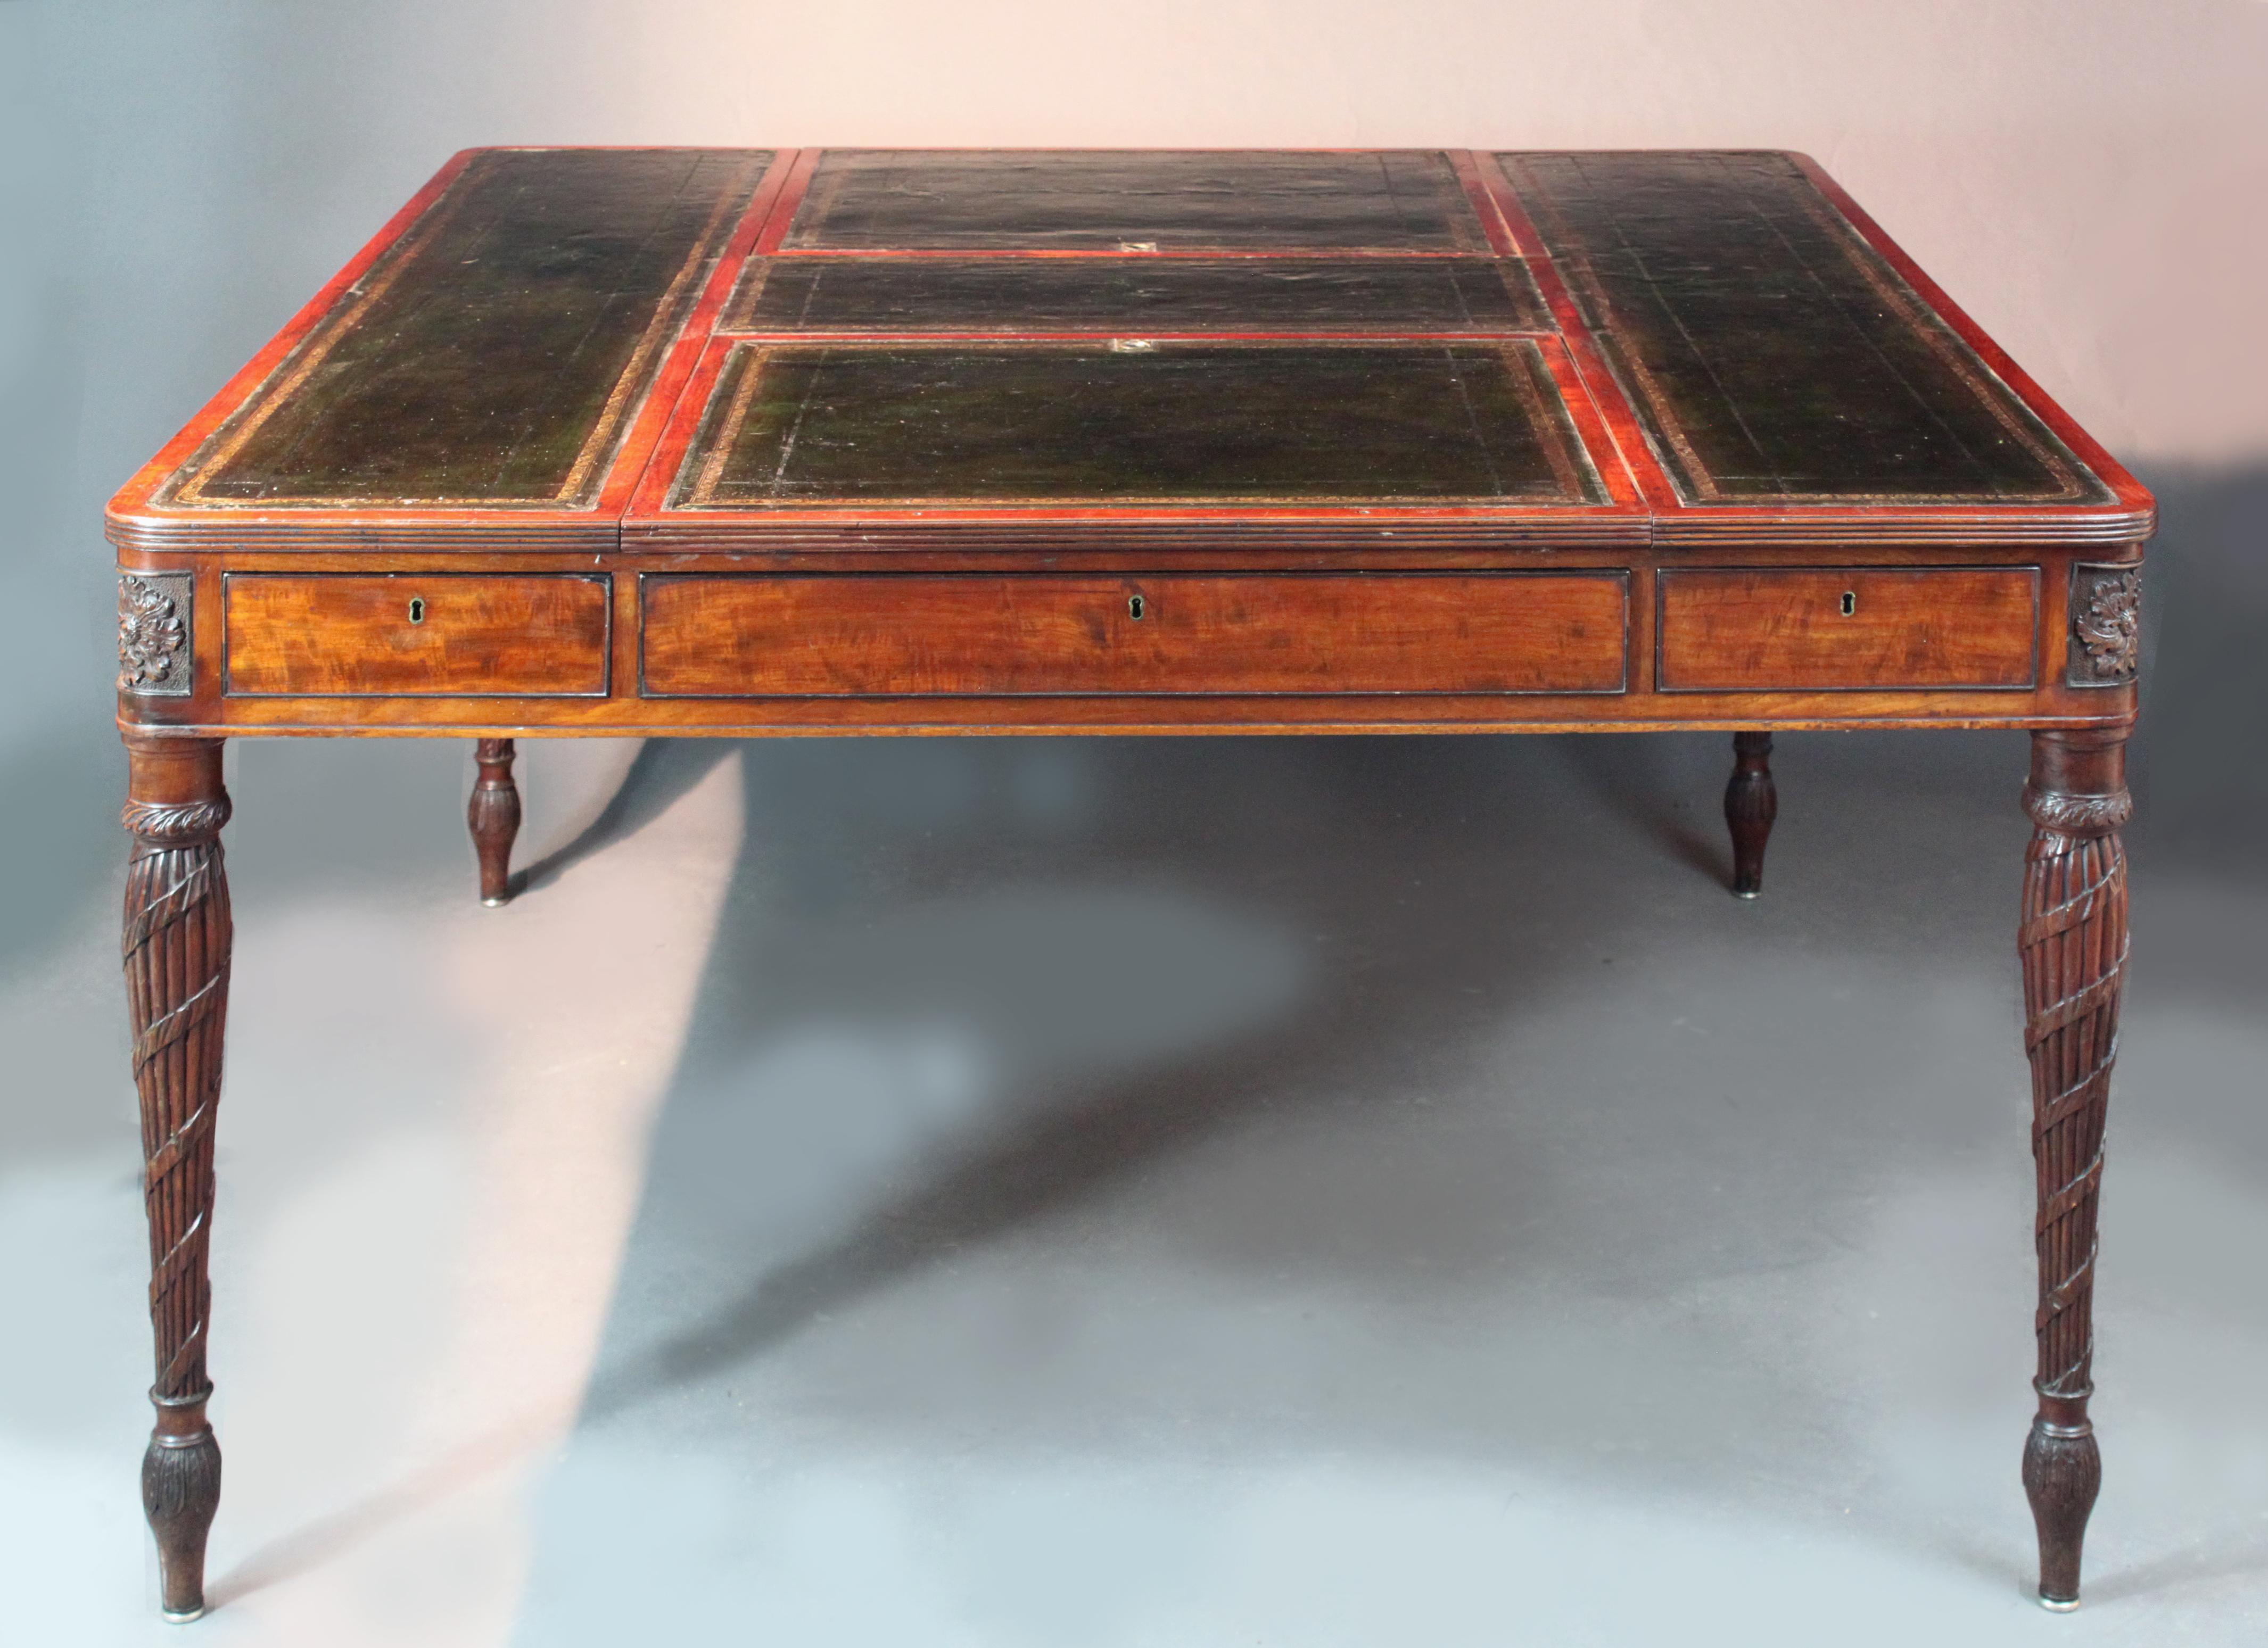 An exceptional George III partners writing table in fiddle grain mahogany with ebony cock beading, 2 adjustable slopes, original dark green leather top and finely carved legs and patera; good original colour.